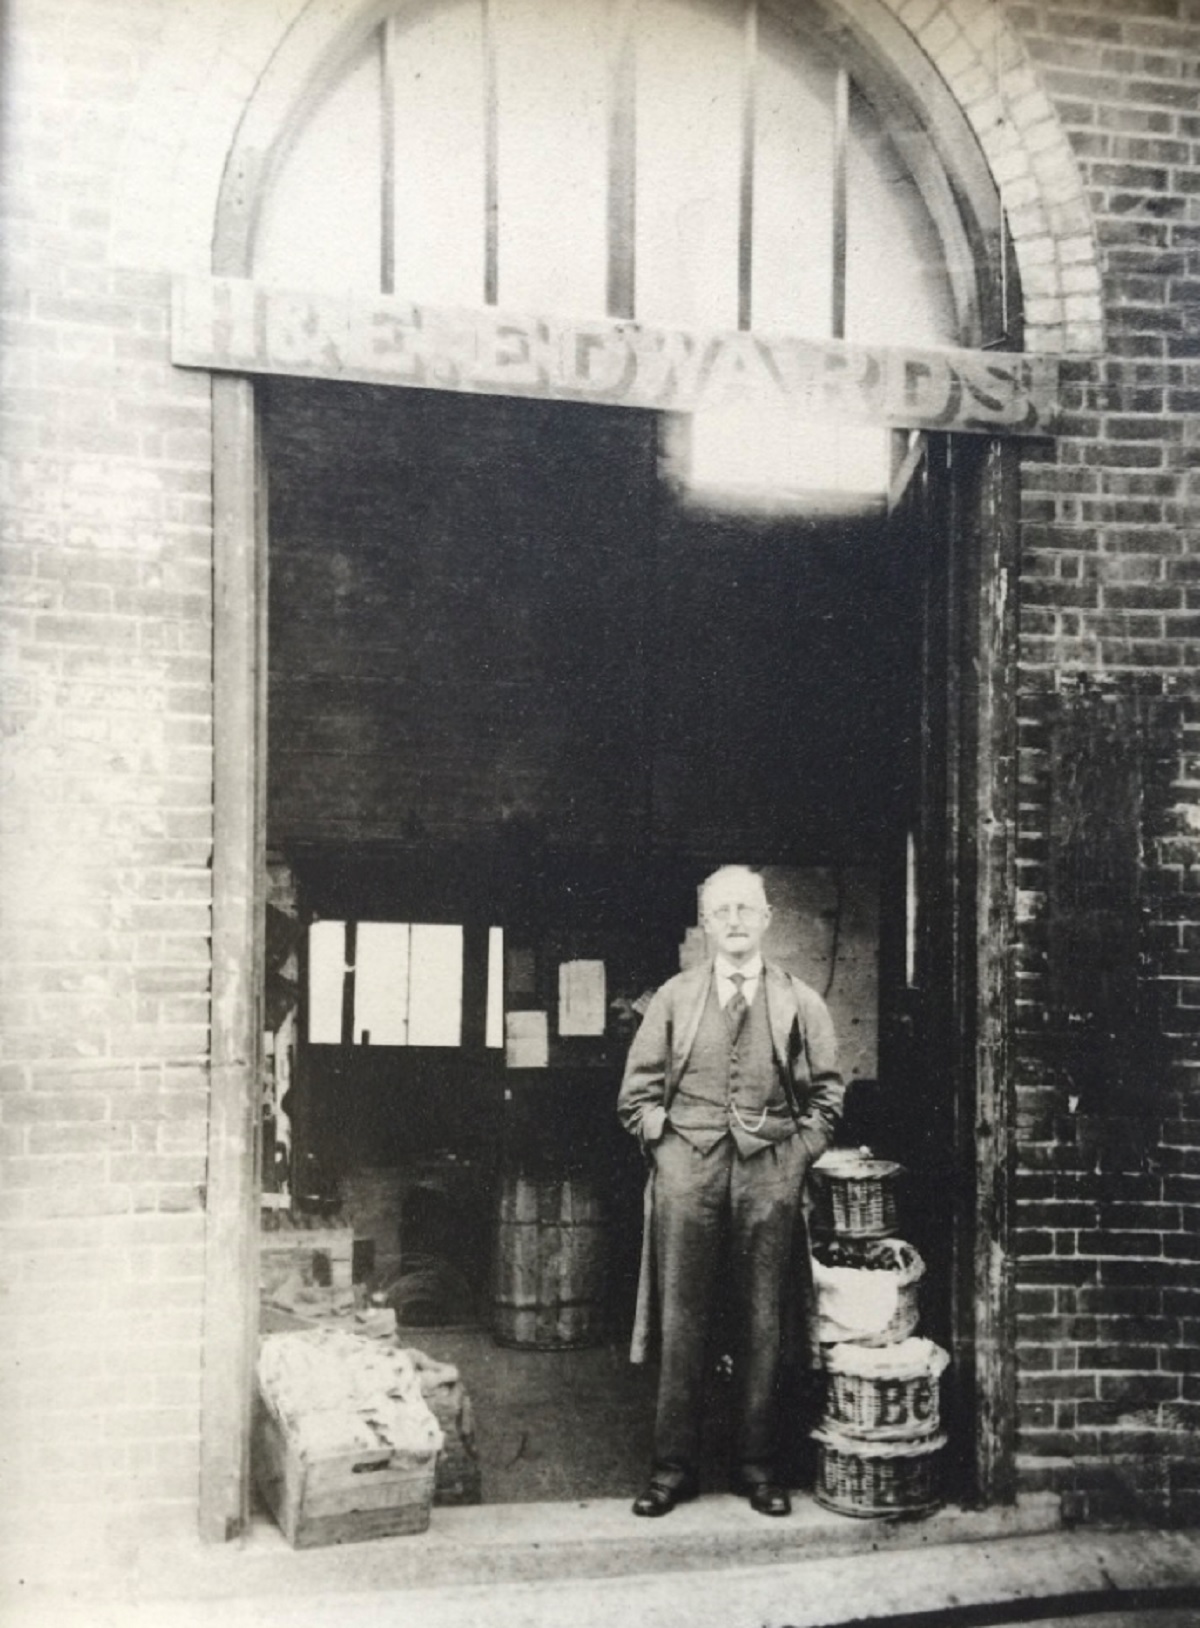 Family history - Neil’s grandfather, Charles Felgate, who ran H & E Edwards with son Reginald just after the Second World War